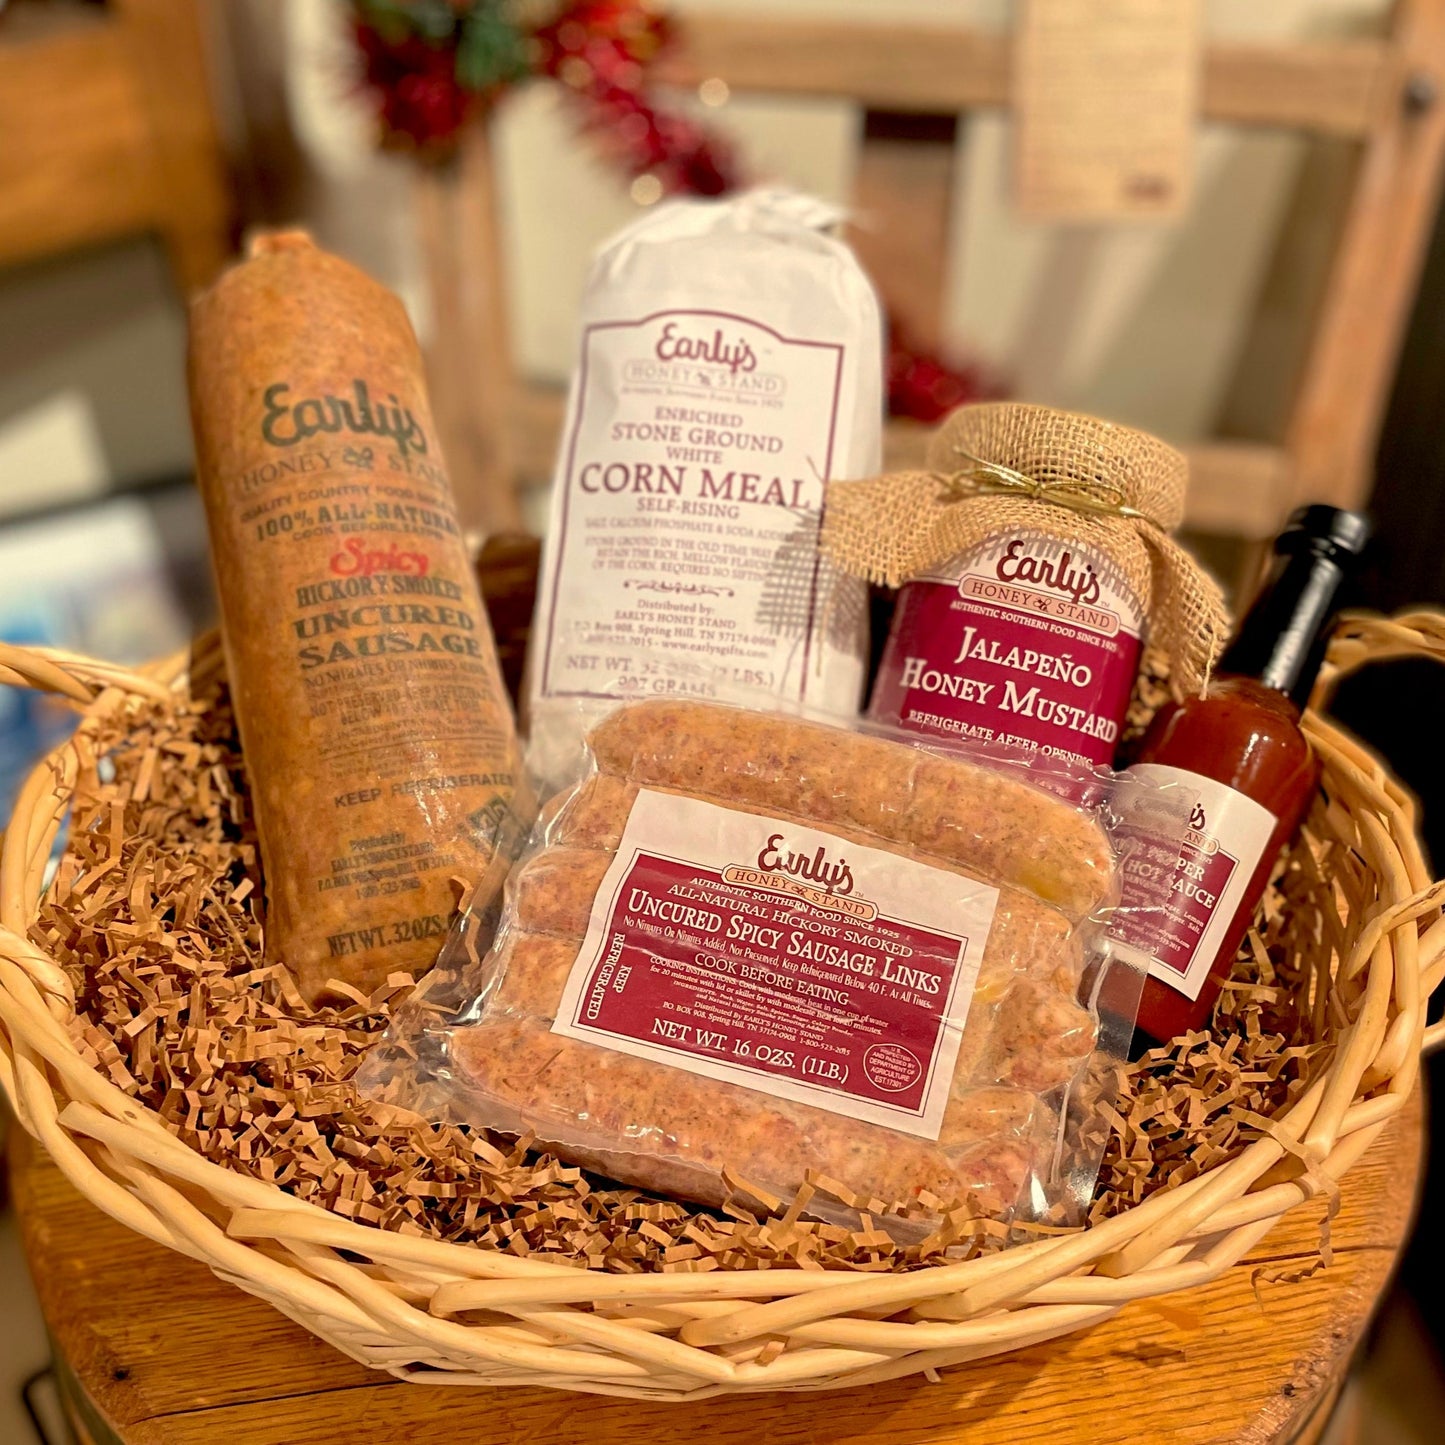 Early's Honey Stand's 'Hotter than a Firecracker' gift box, featuring spicy sausage, mustard, hot sauce, and cornmeal. The items are beautifully arranged in a shippable gift box, perfect for anyone who loves bold, spicy flavors.